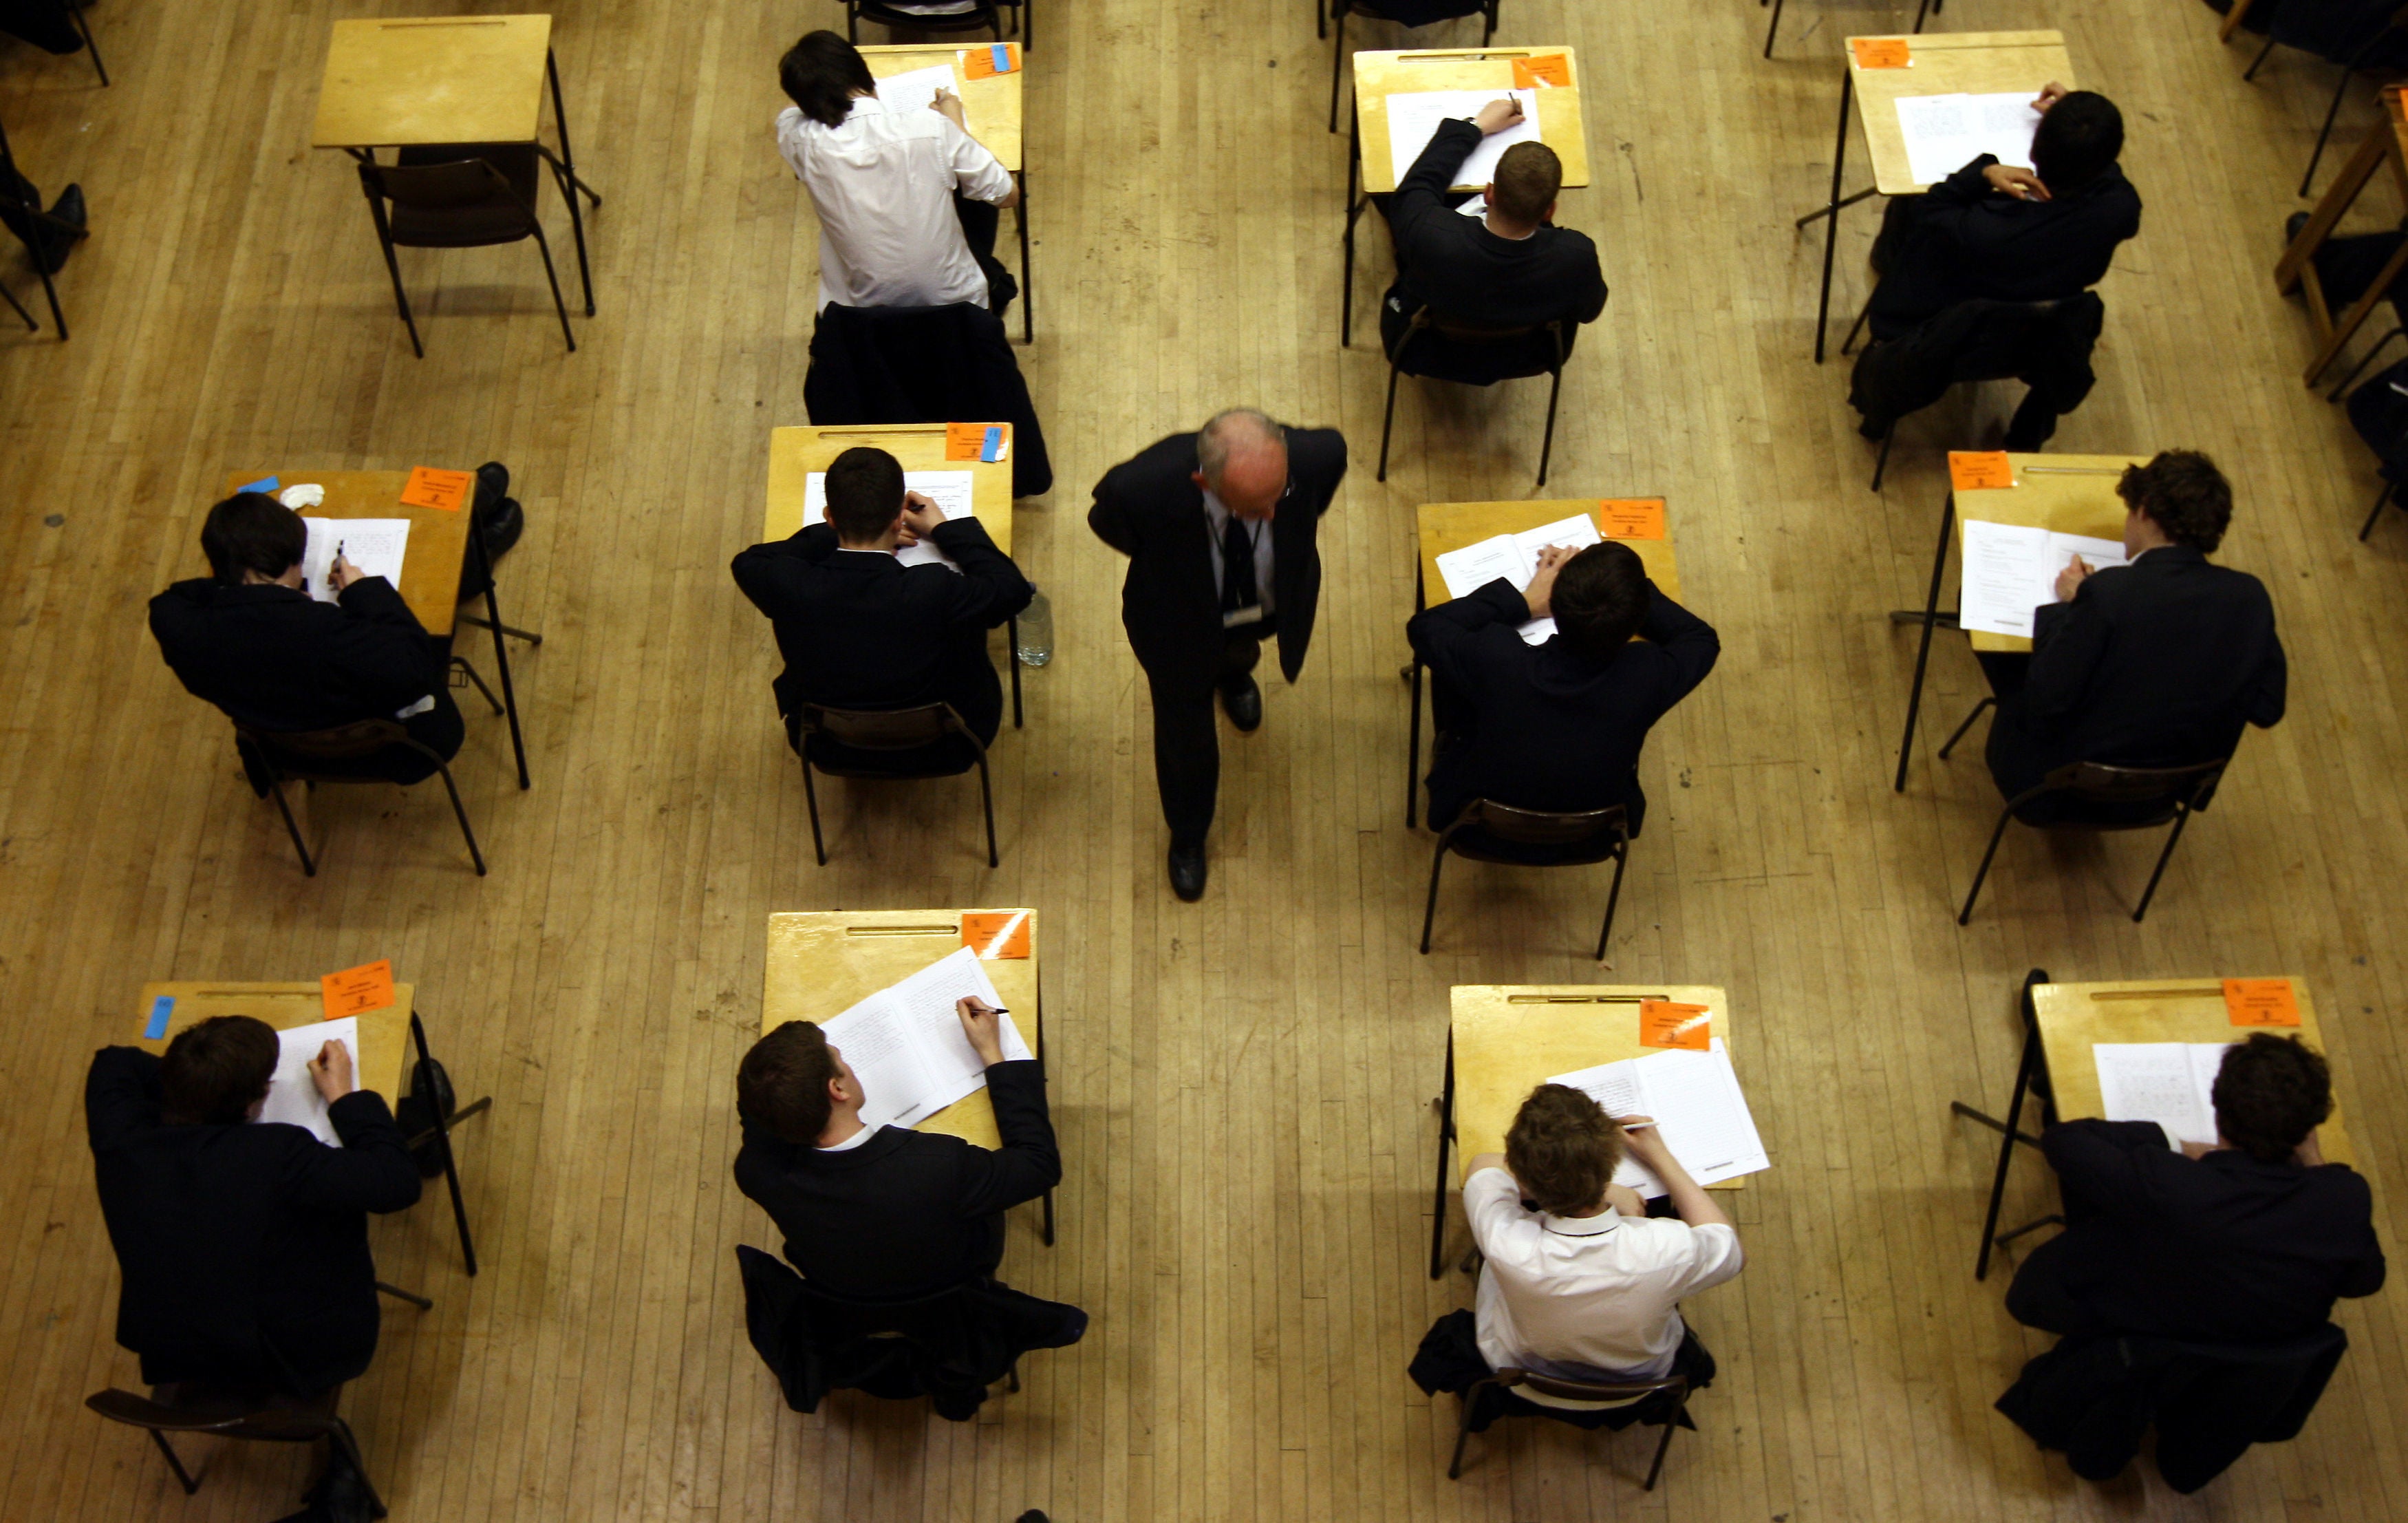 Teachers will be trusted to determine pupils’ grades in lieu of exams this year